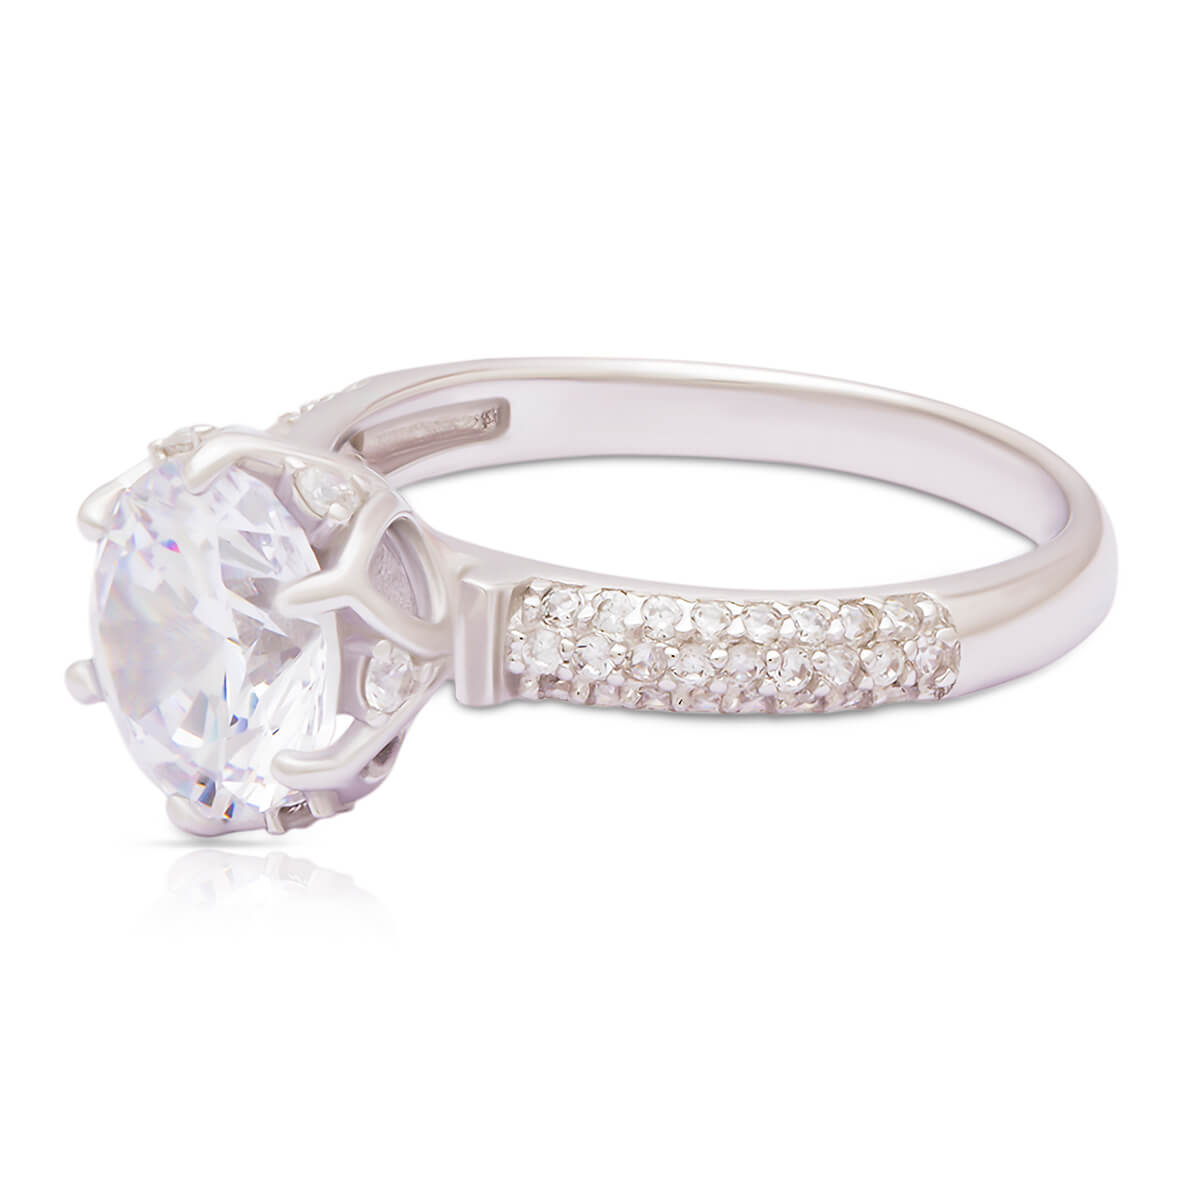 Shiny Solitaire Silver Ring